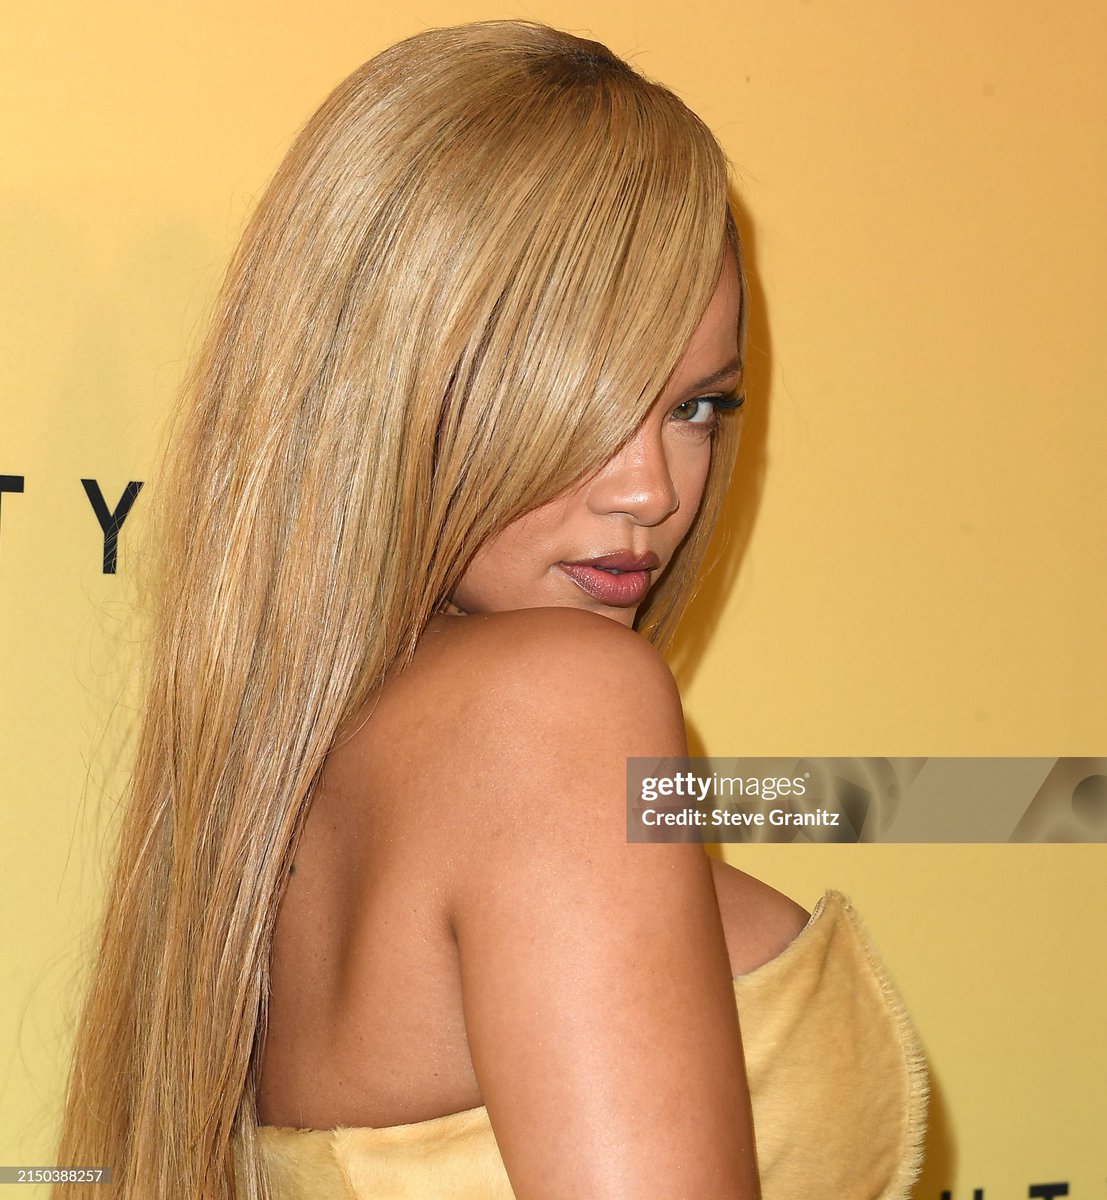 Rihanna at her Fenty Beauty event in Los Angeles tonight 💖 (via Getty Images)